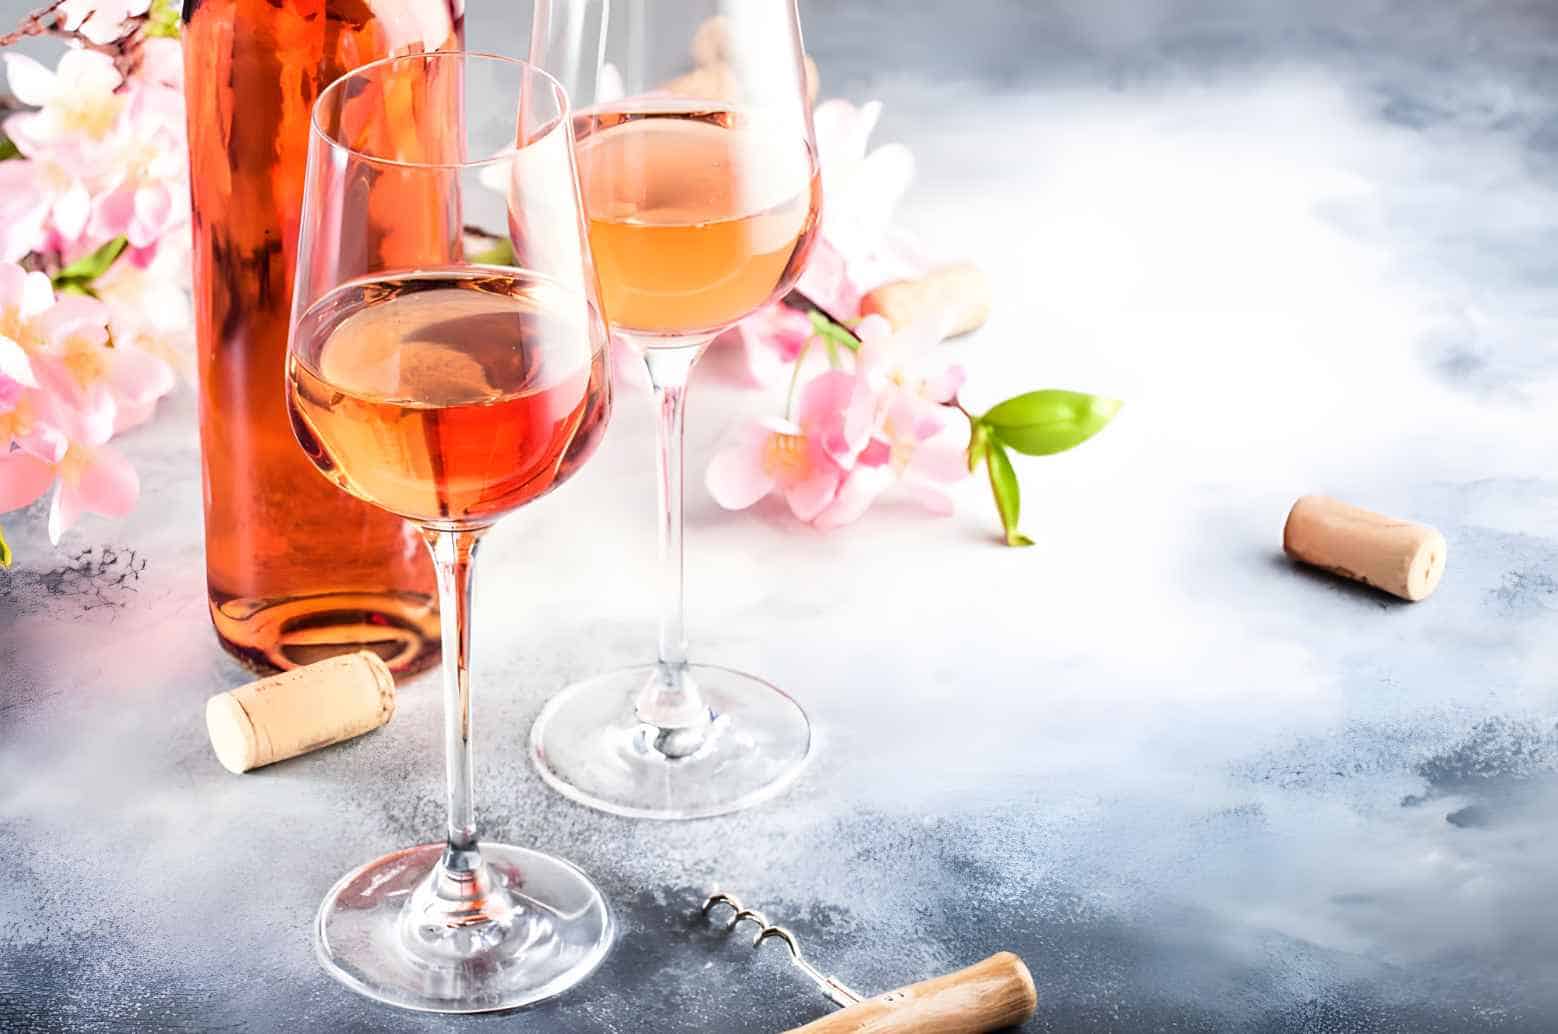 What is the Difference Between White Zinfandel and Standard Zinfandel